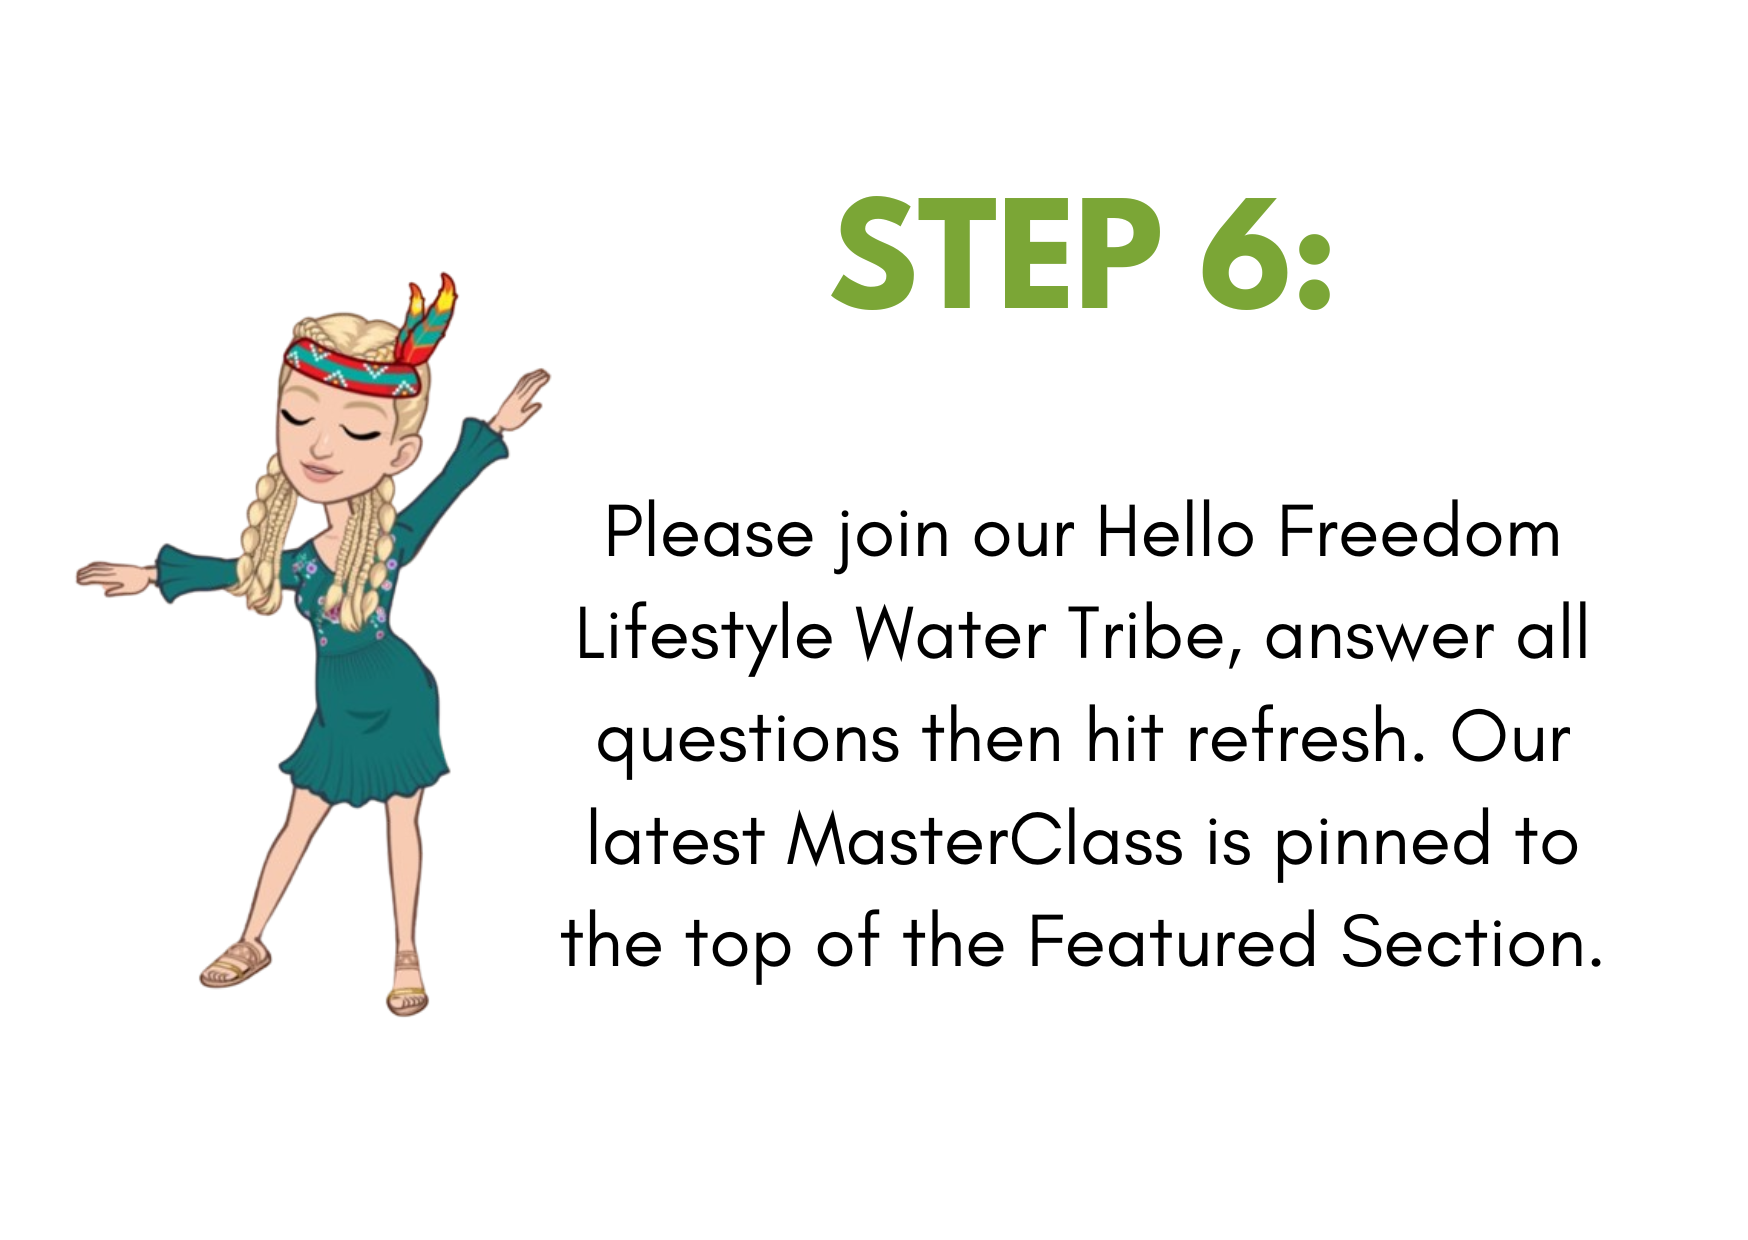 STEP 6 JOIN OUR HELLO FREEDOM TRIBE